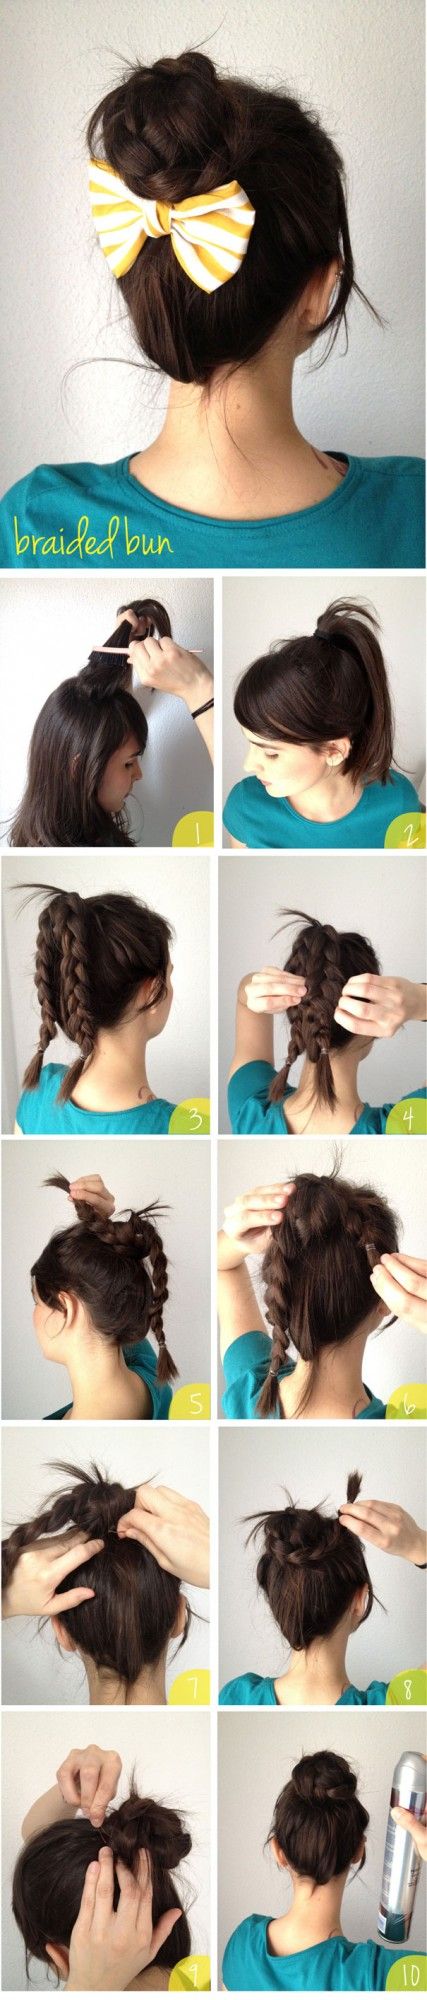 Quick Hairstyle